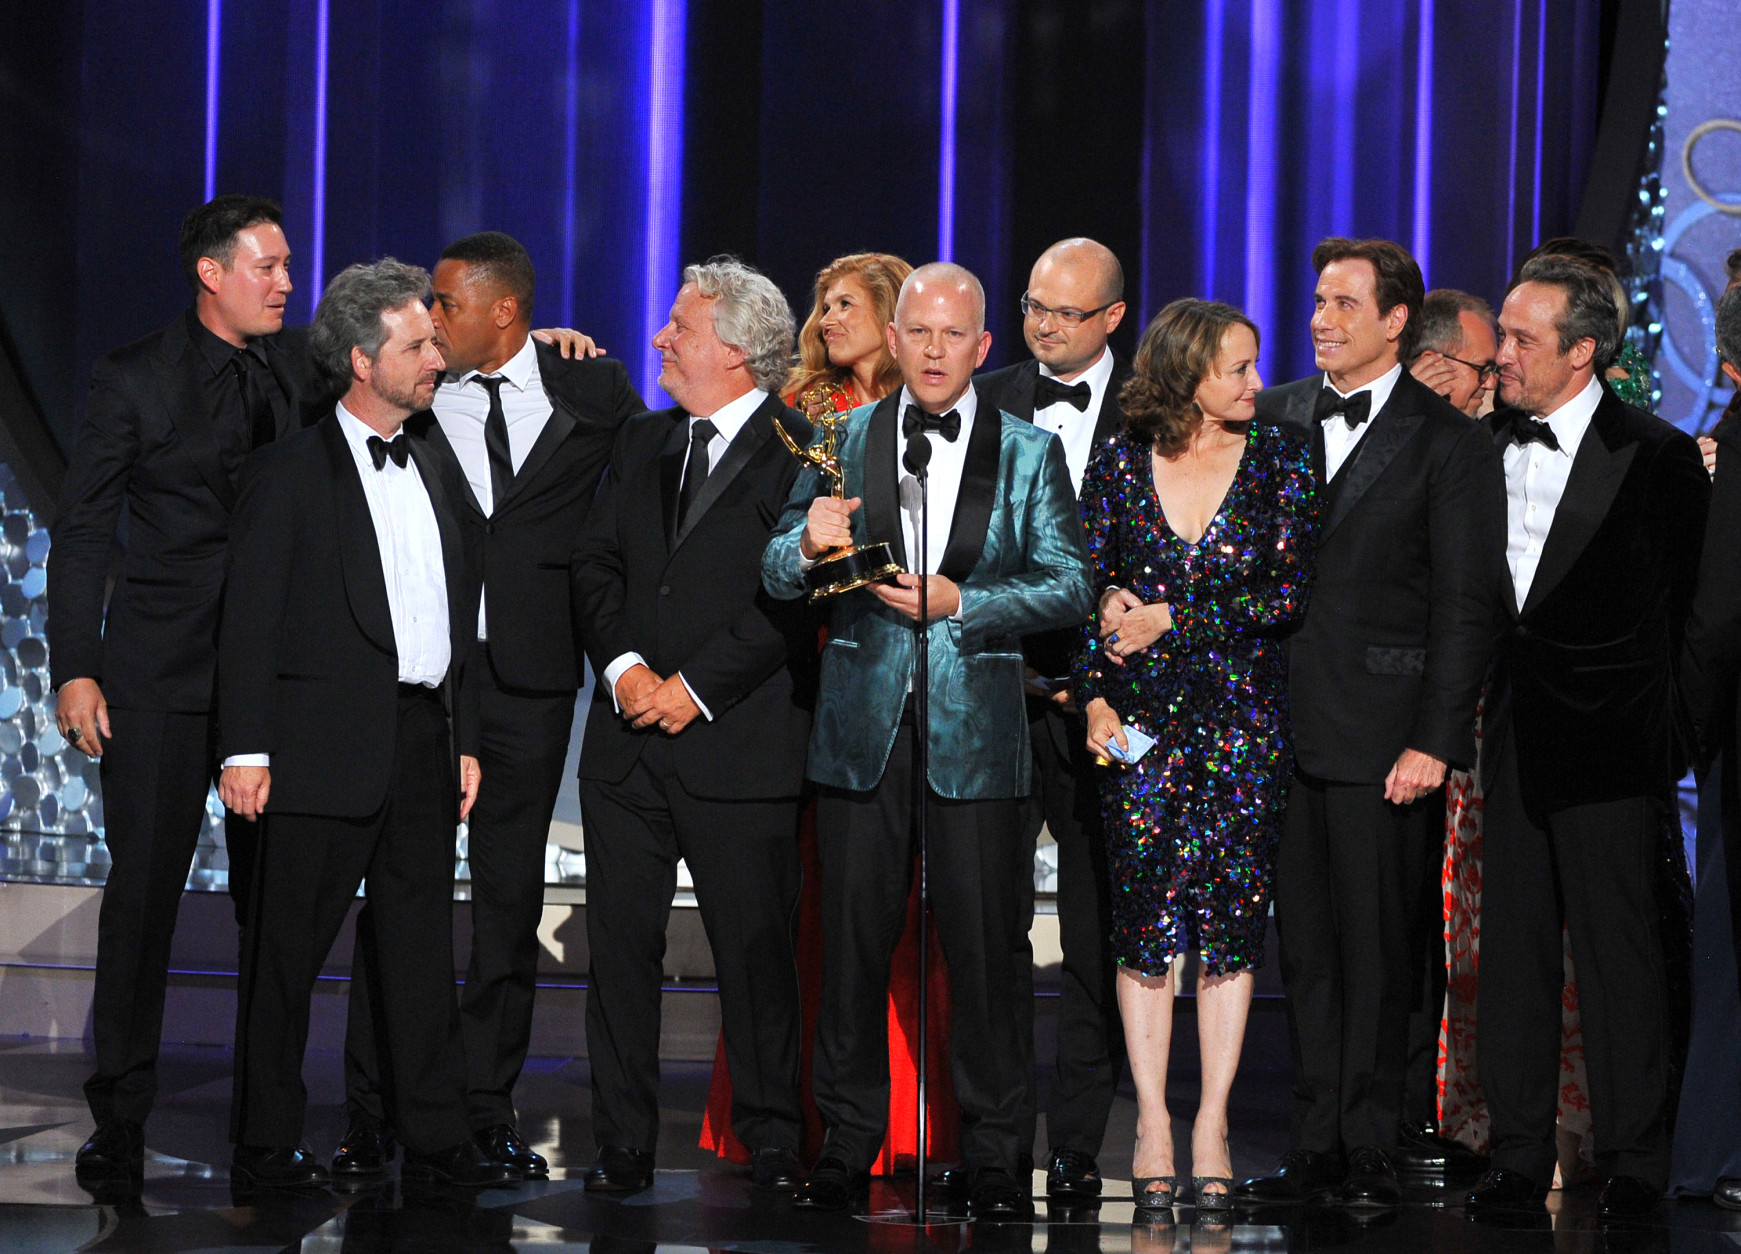 Ryan Murphy and the cast and crew of The People v. O.J. Simpson: American Crime Story accept the award for outstanding limited series at the 68th Primetime Emmy Awards on Sunday, Sept. 18, 2016, at the Microsoft Theater in Los Angeles. (Photo by Vince Bucci/Invision for the Television Academy/AP Images)